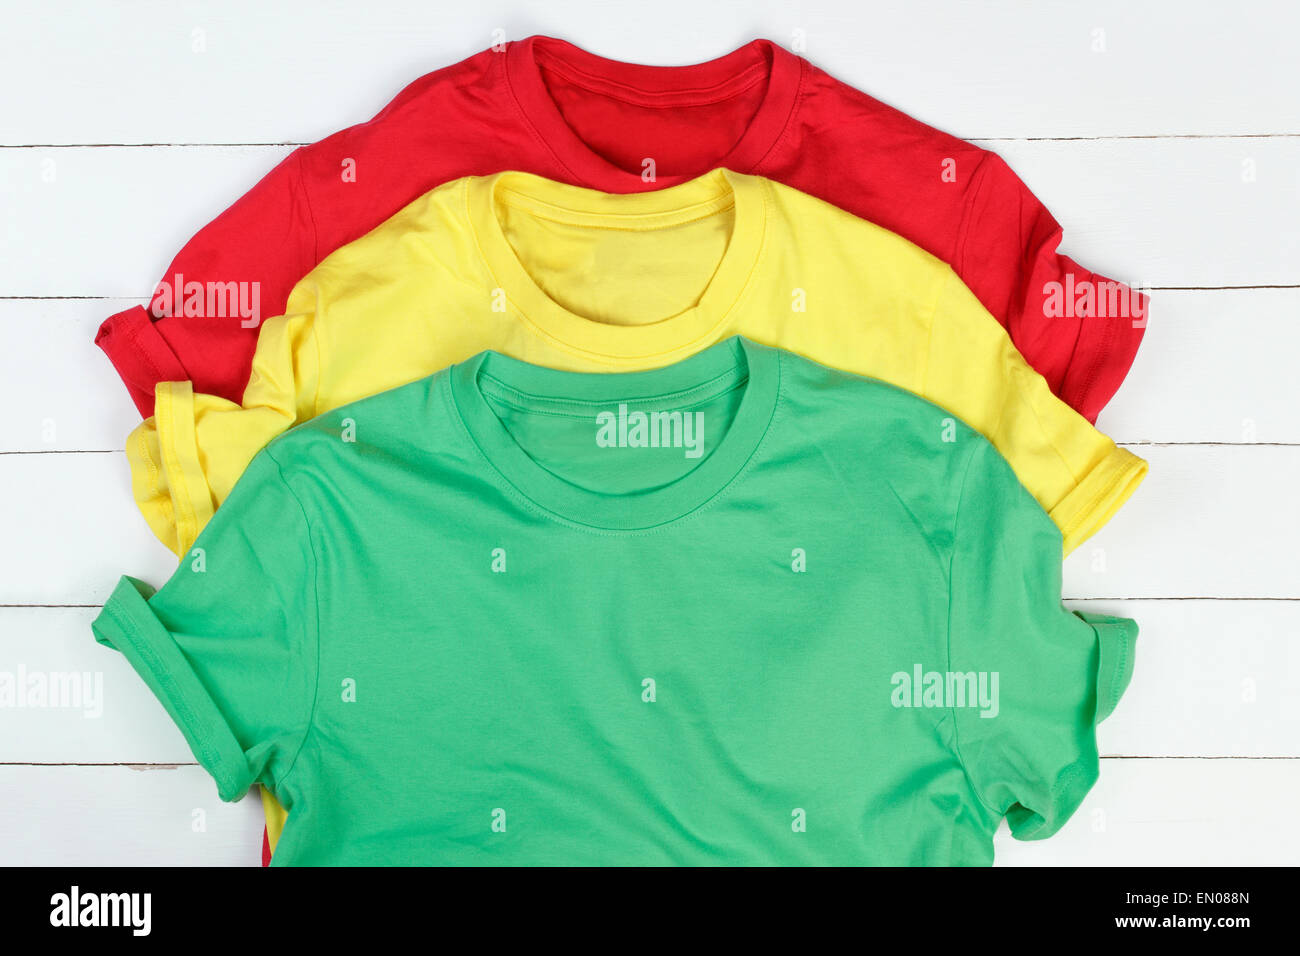 Colorful t-shirts Stock Photo